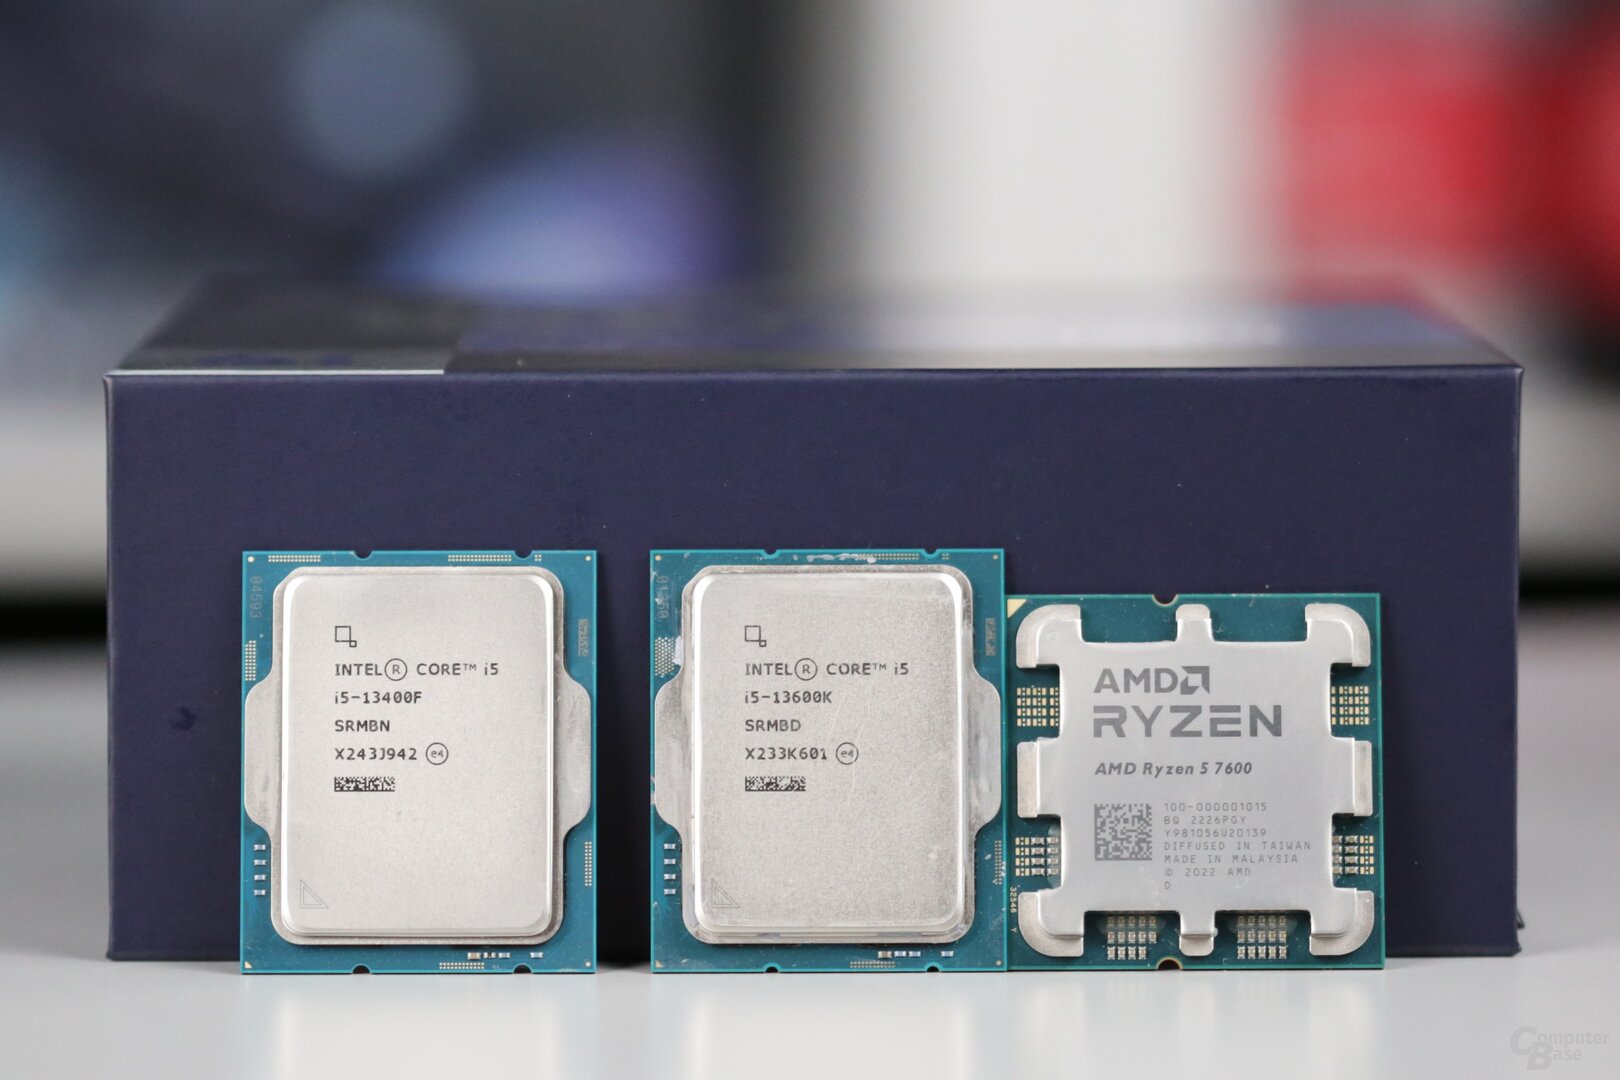 Not every Core i5-13400F is the same: Raptor (B0) vs. Alder (C0